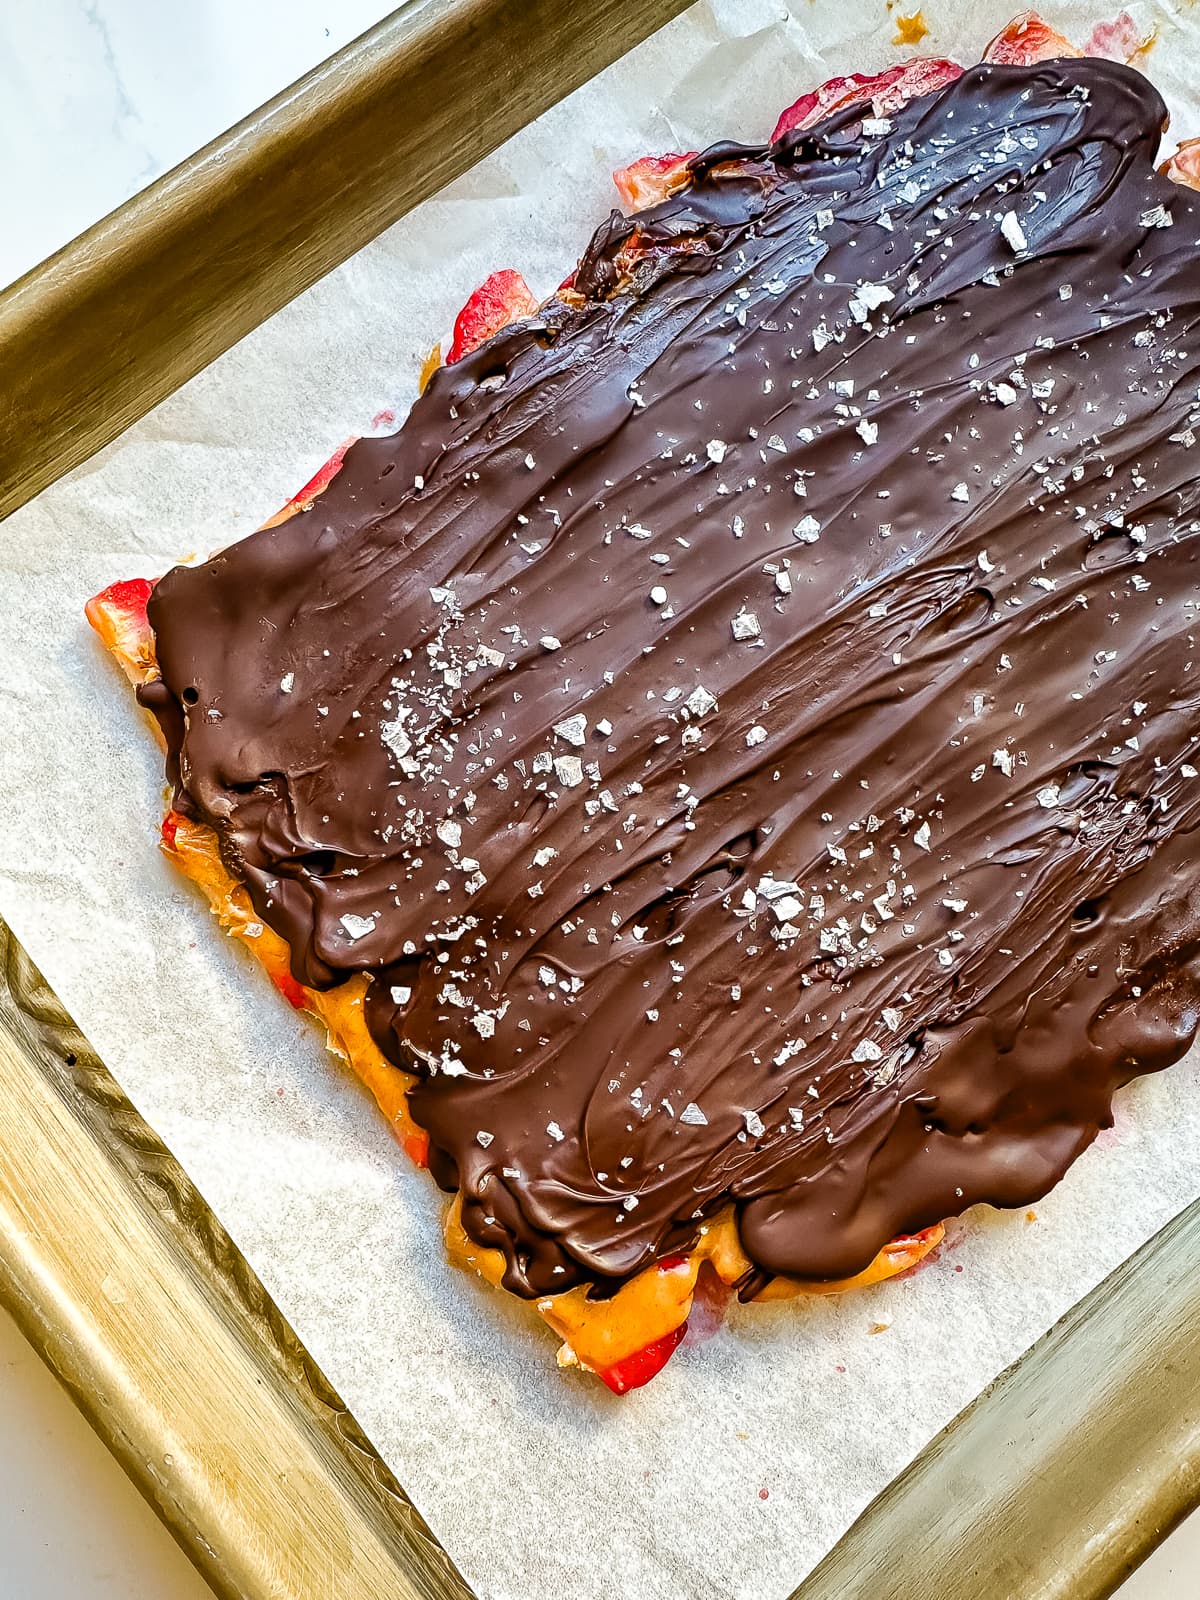 A sheet pan lined with parchment with strawberry peanut butter chocolate bark on top.